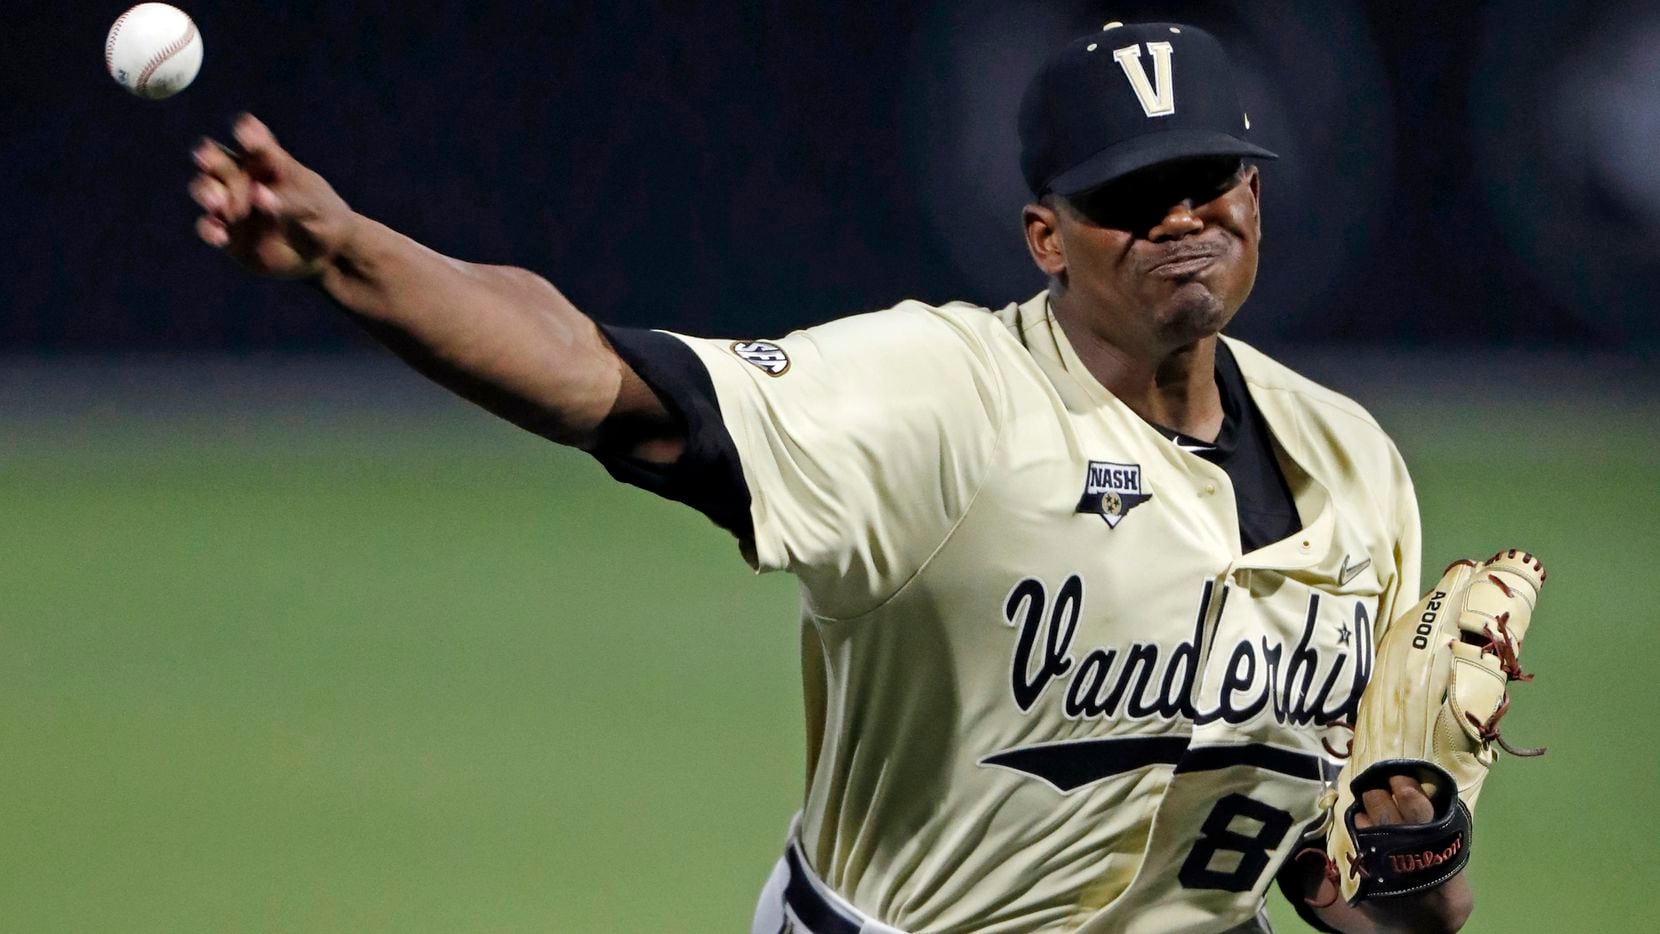 FILE - In this June 8, 2019, file photo, Vanderbilt's Kumar Rocker throws to a Duke batter during the eighth inning of an NCAA college baseball tournament super regional game in Nashville, Tenn. The 6-4, 255-pound Rocker was the talk of the NCAA Tournament after throwing a 19-strikeout no-hitter against Duke in super regionals and going 2-0 with a 1.46 ERA to earn Most Outstanding Player at the College World Series. (AP Photo/Wade Payne, File)